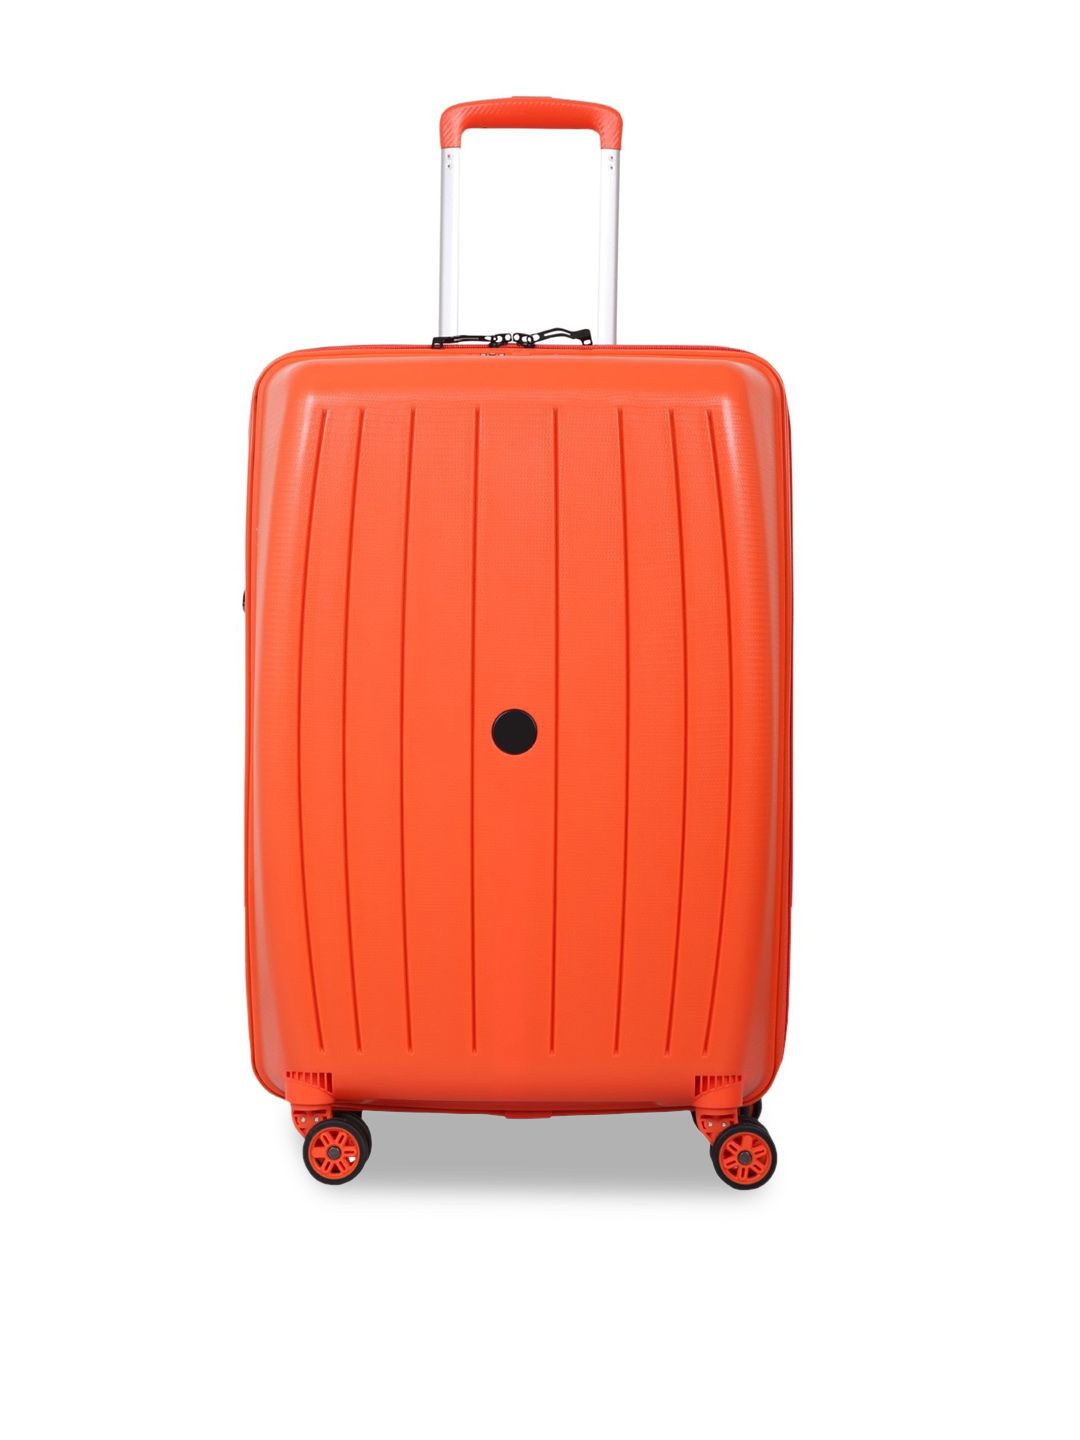 Polo Class Orange Striped Hard Sided Scan Cabin Trolley Bag Price in India